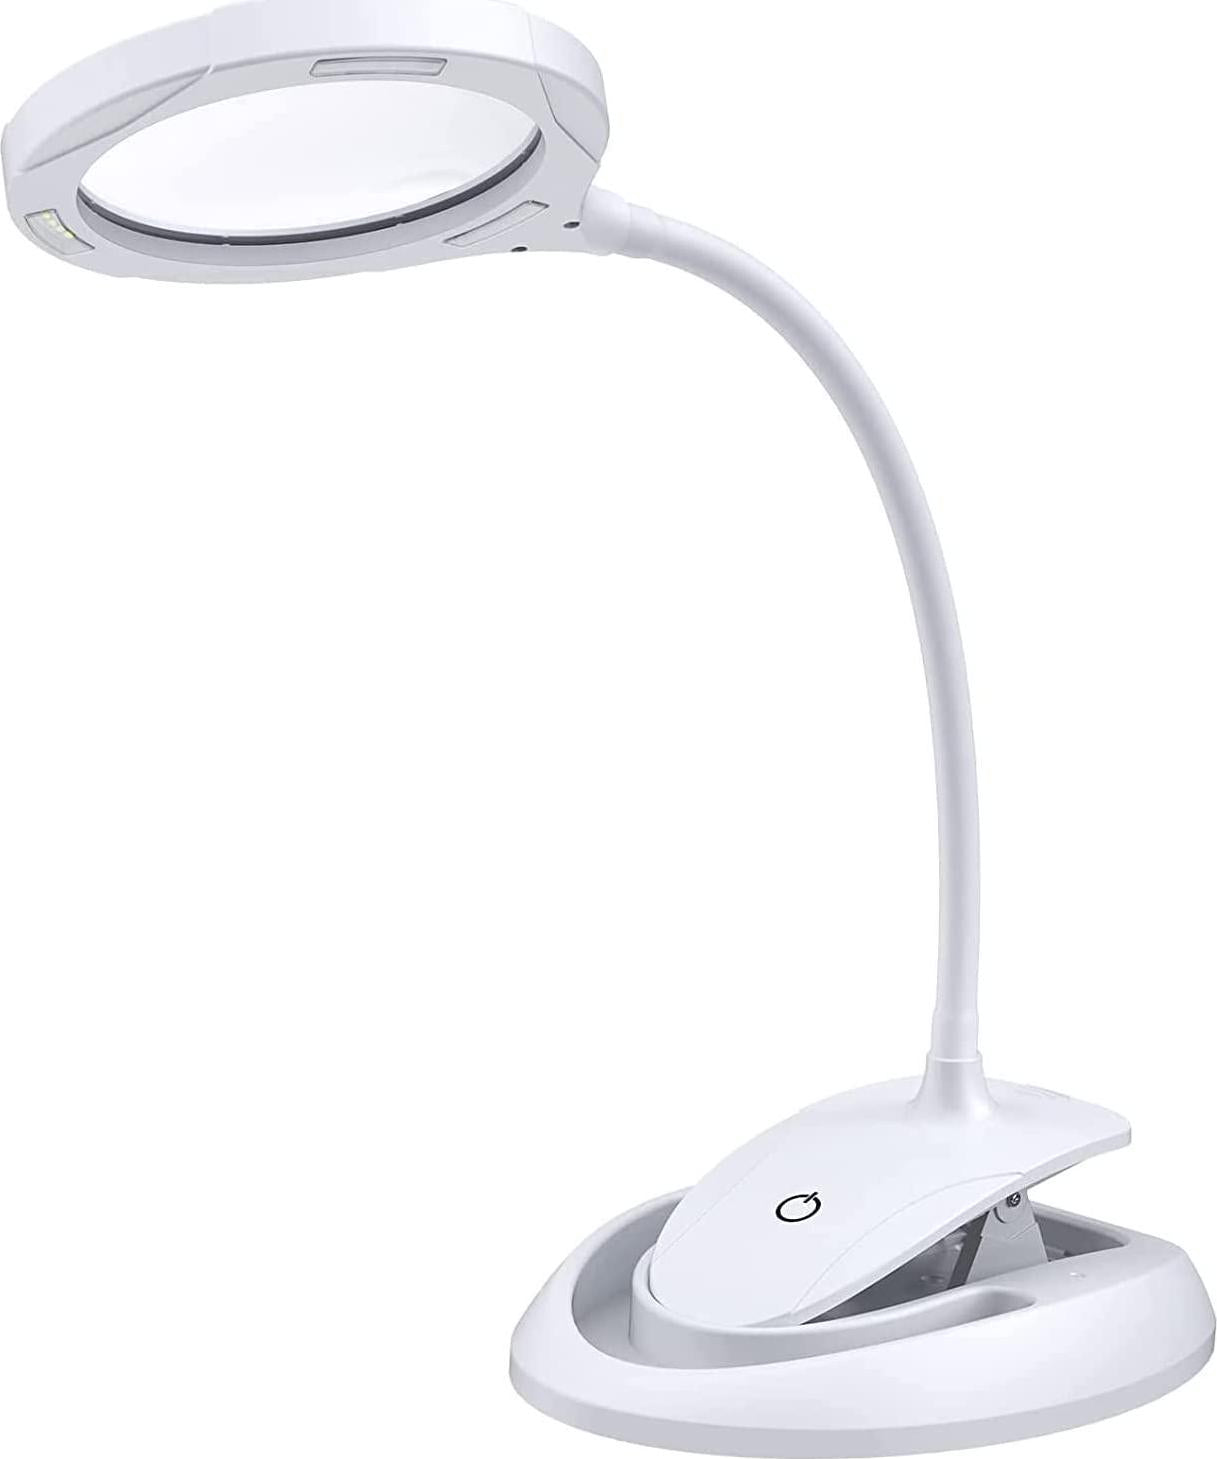 eSynic, Magnifying Lamp,eSynic Daylight LED Magnifying Lamp Rechargeable Magnifying Illuminated Optical Glass Magnifier 5X 10X Lens with 3 Adjustable Light Settings for Reading Sewing Crafts Handcraft